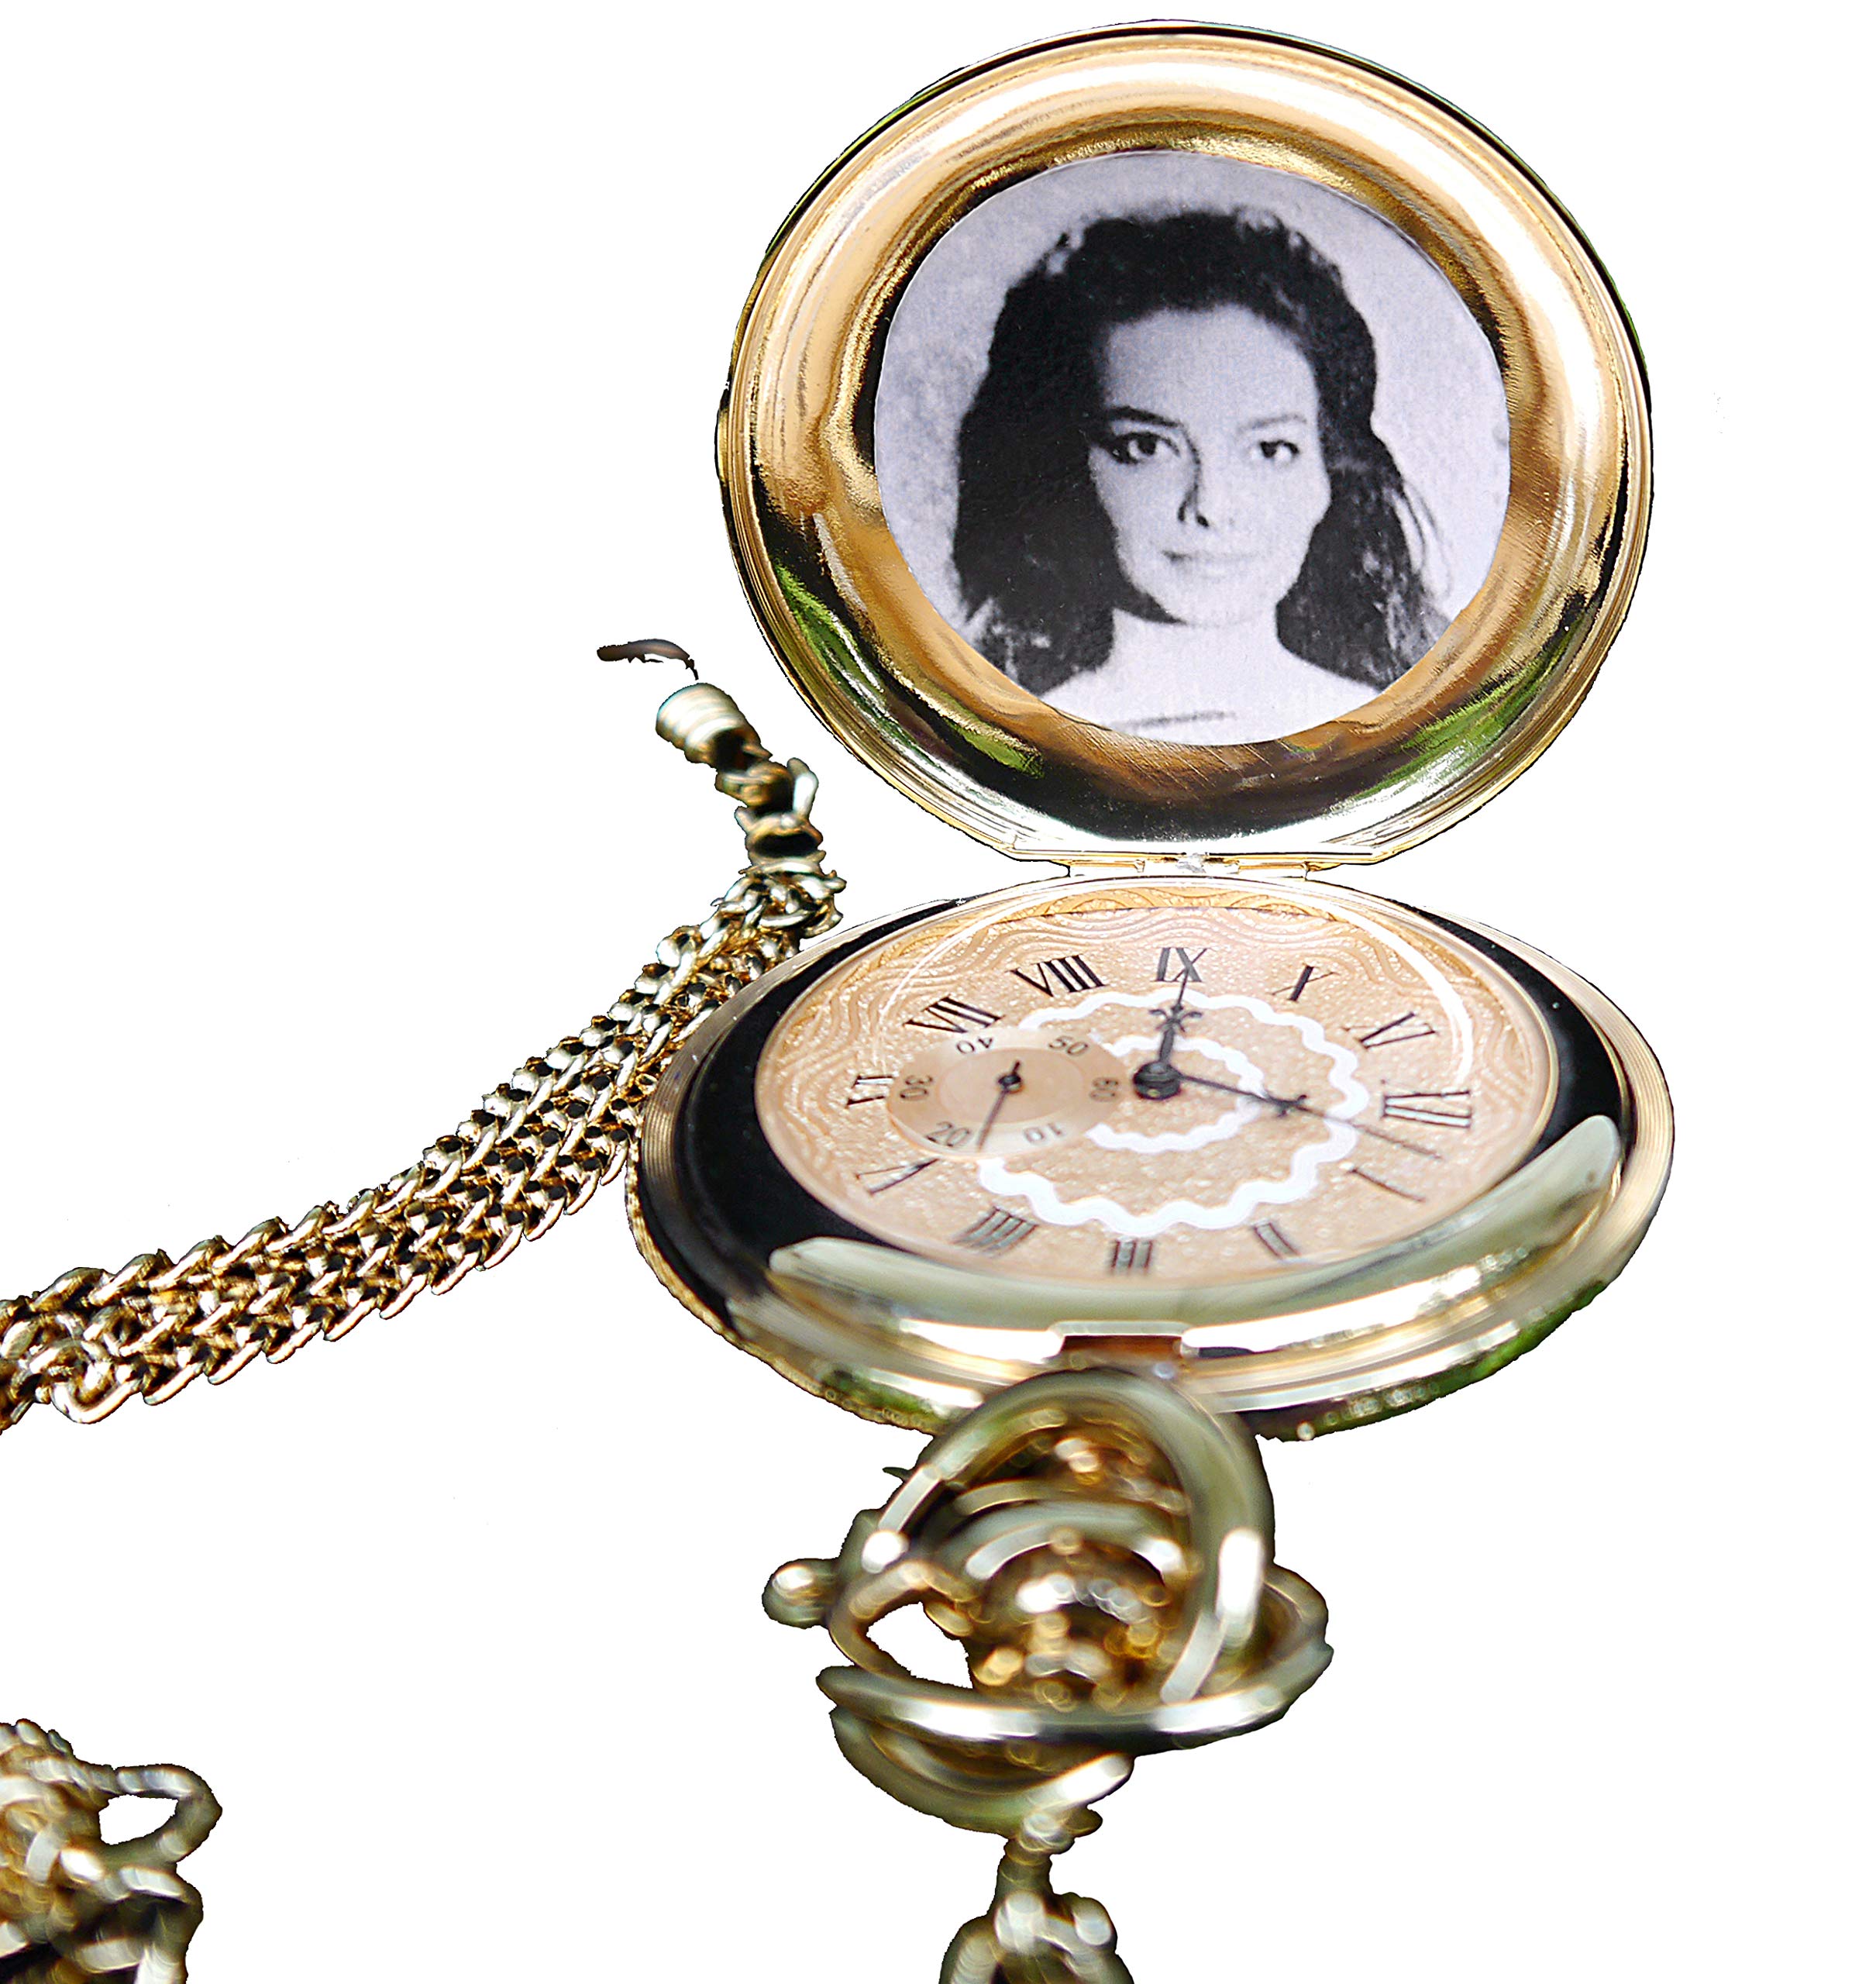 StraightLine Music Pocket Watch Movie Prop from for A Few Dollars More - Clint Eastwood + Lee Van Cleef - Great Gift